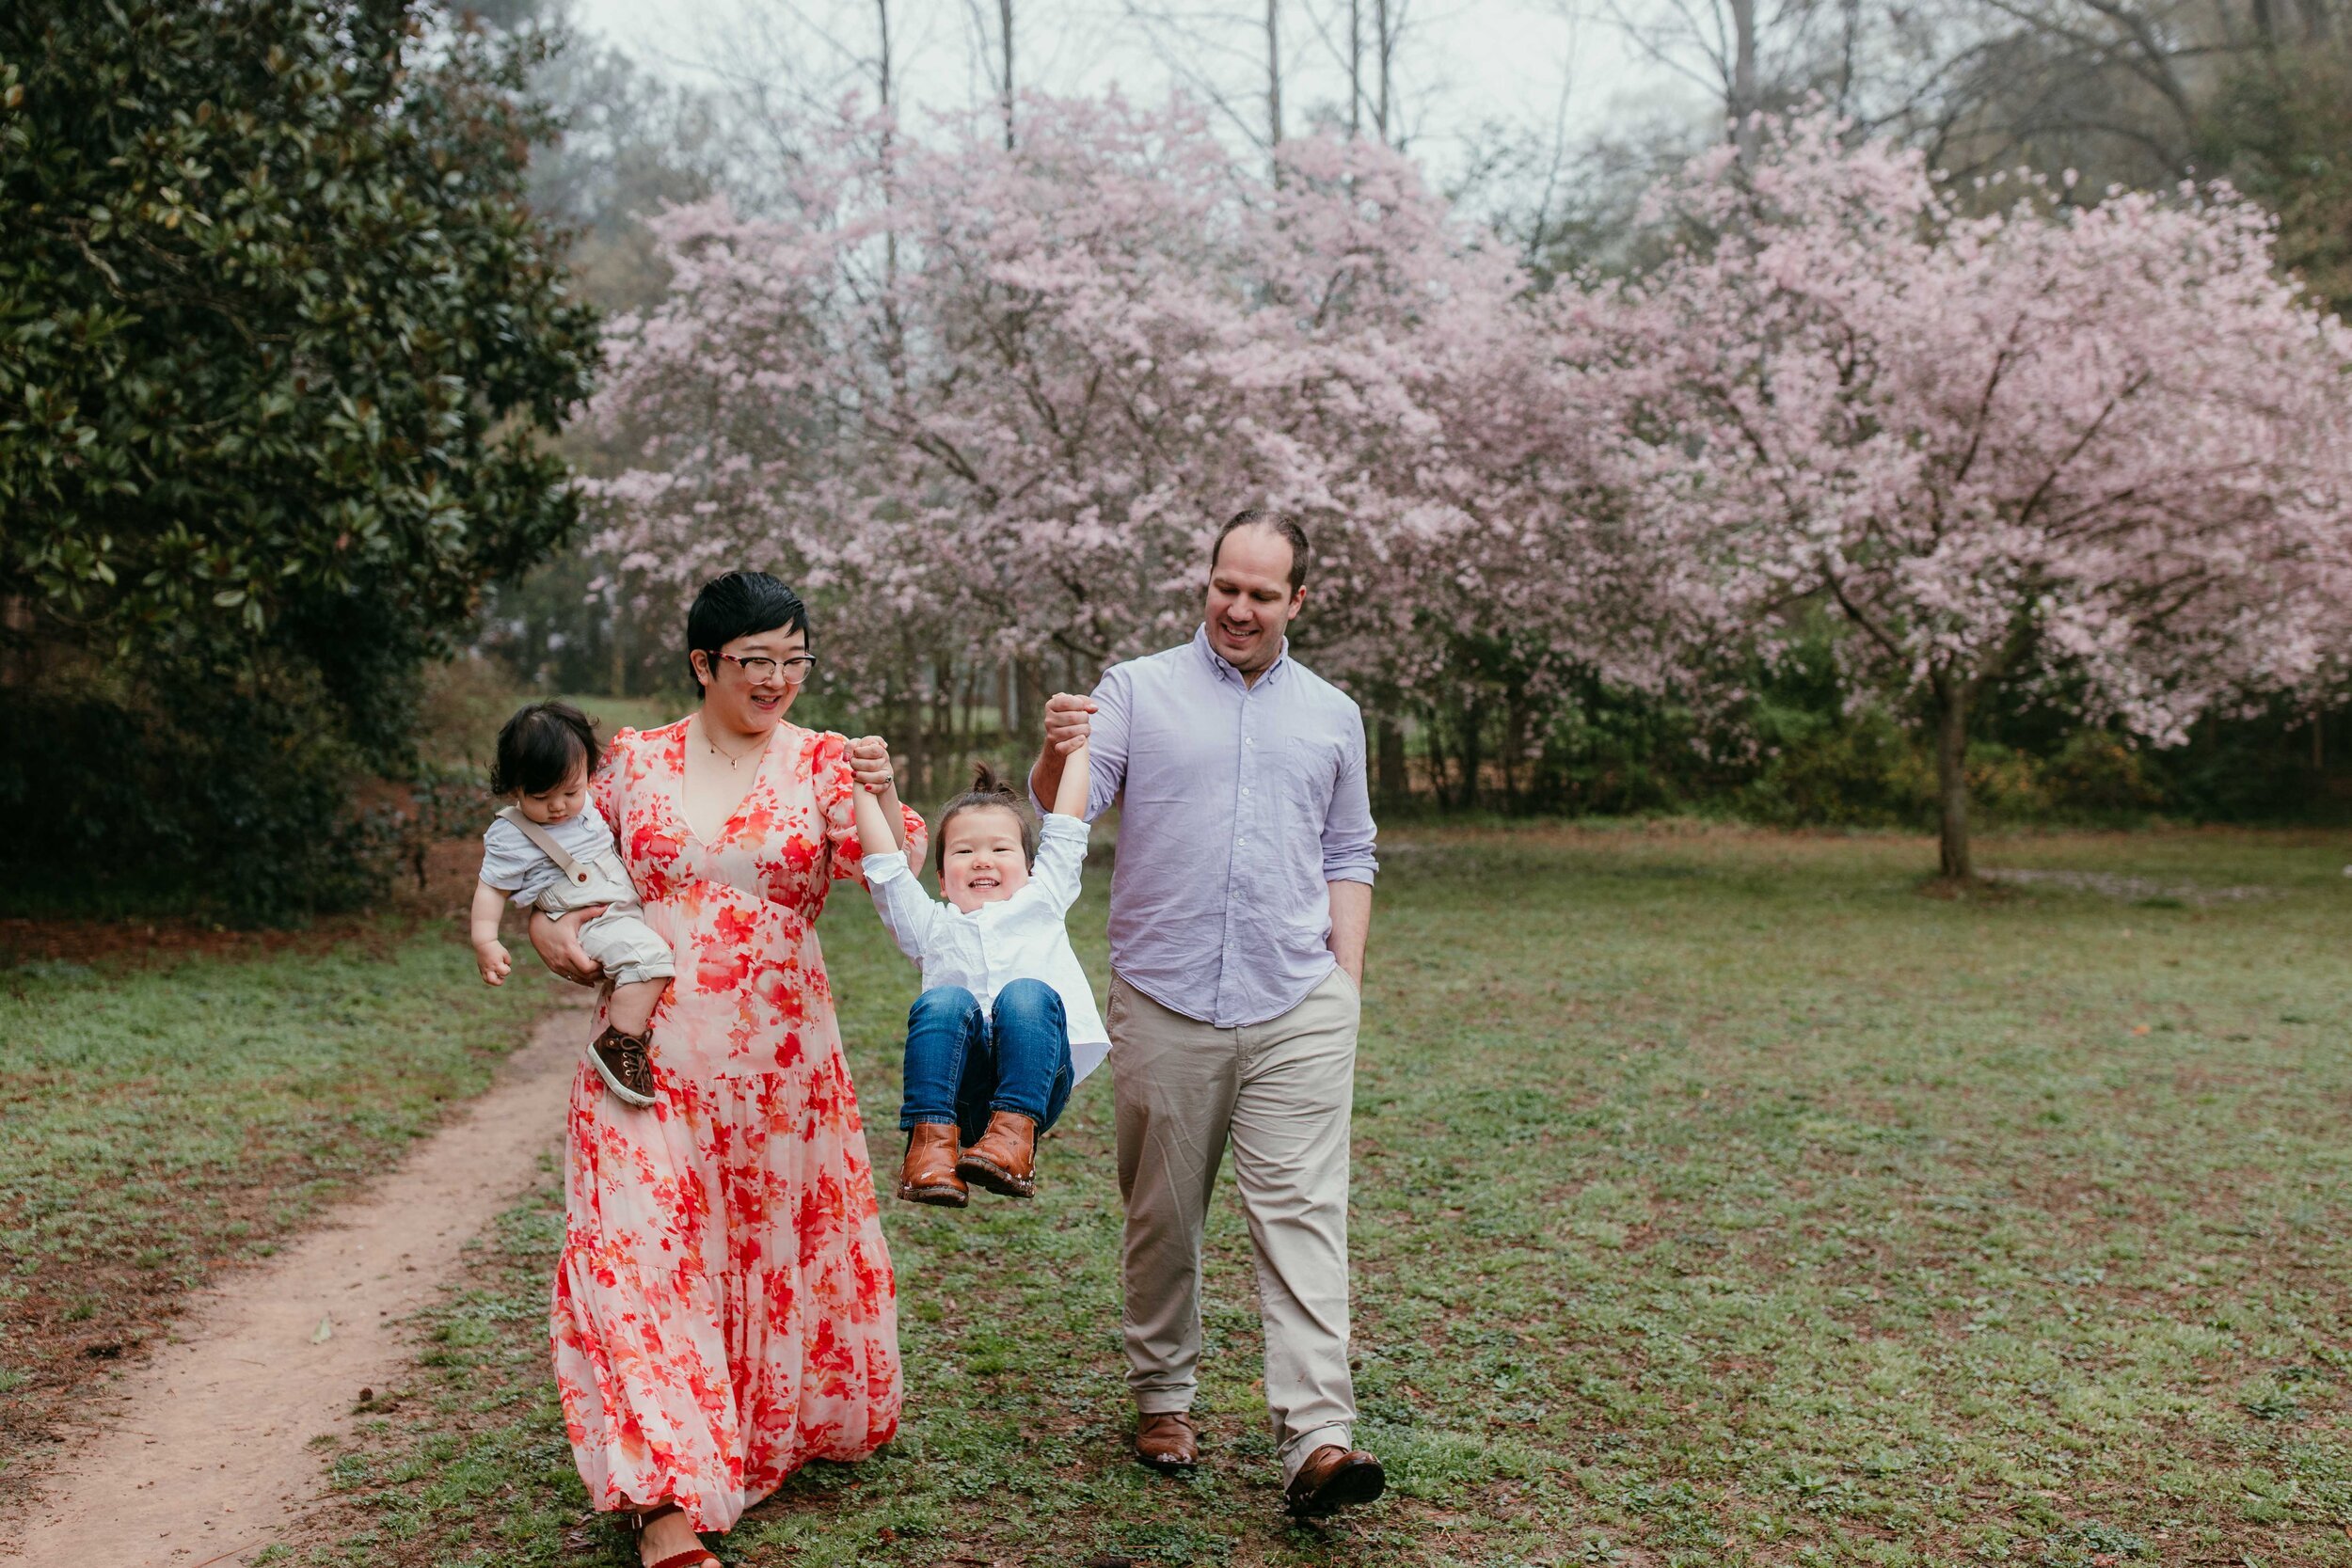 family of four walk together in grass field in front of pink flowering trees in Spring 